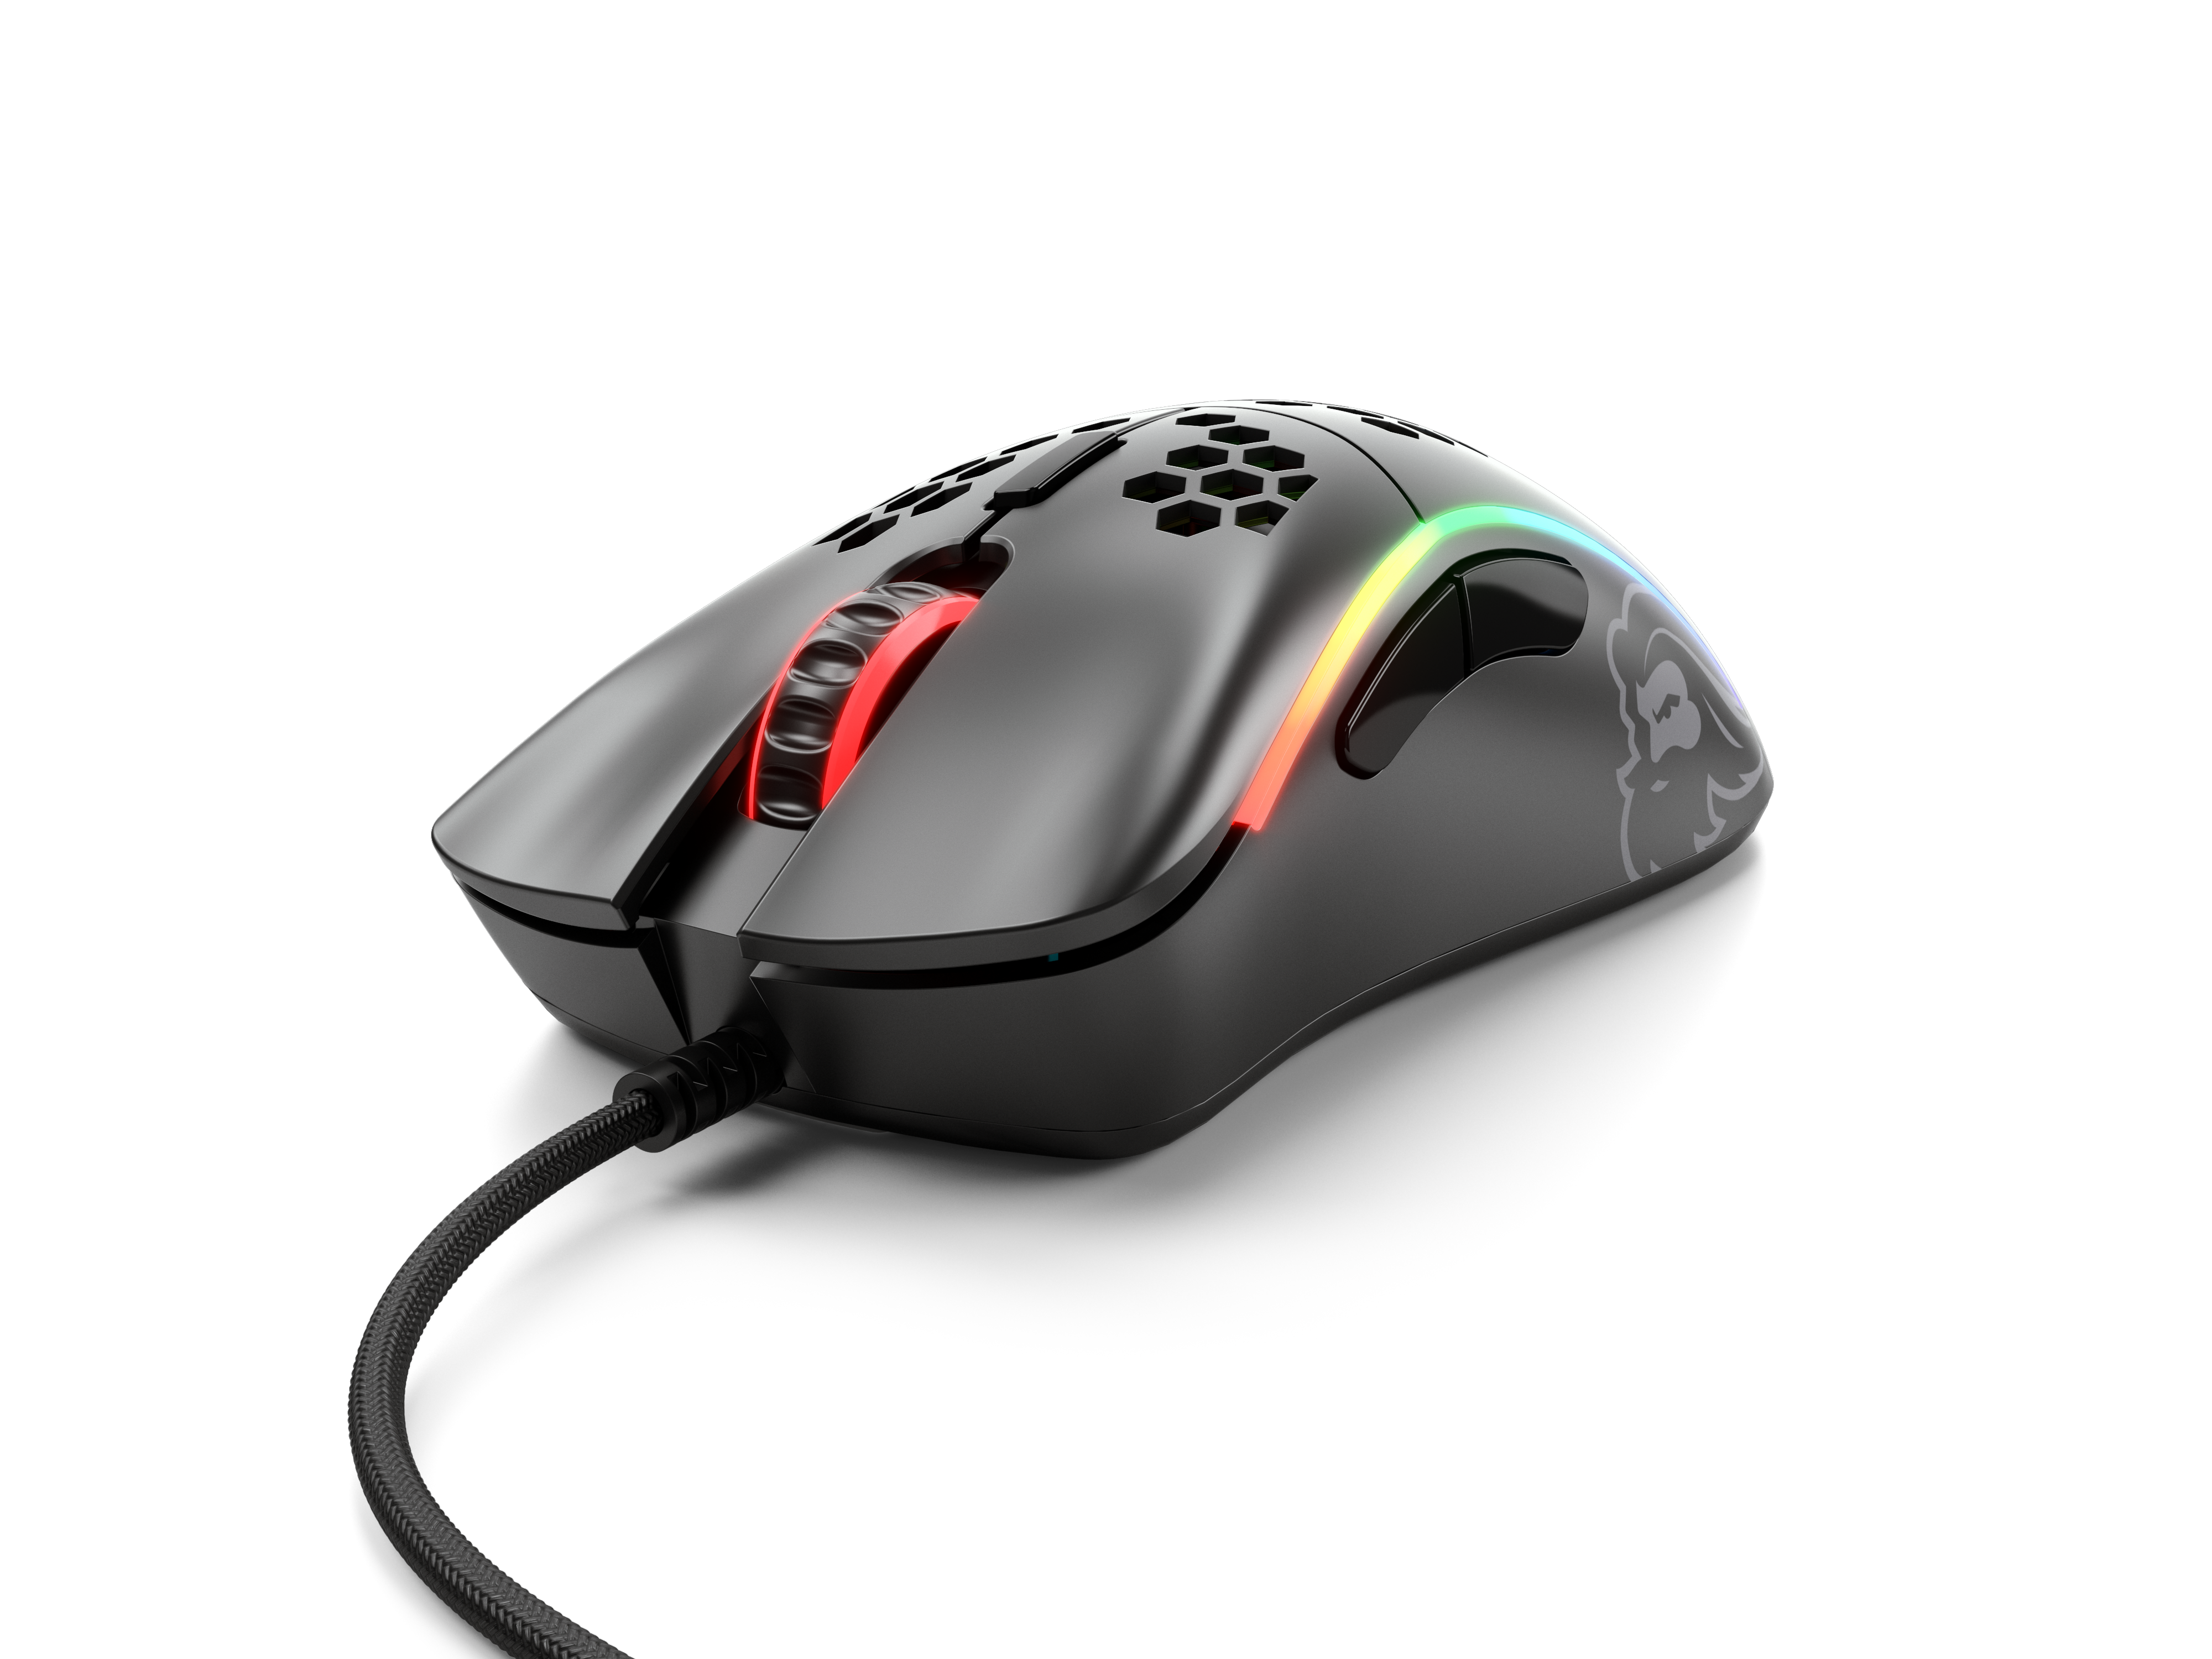 Glorious Gaming Mouse Model D Minus 61g- Matte Black - Dragon Master For Electronics